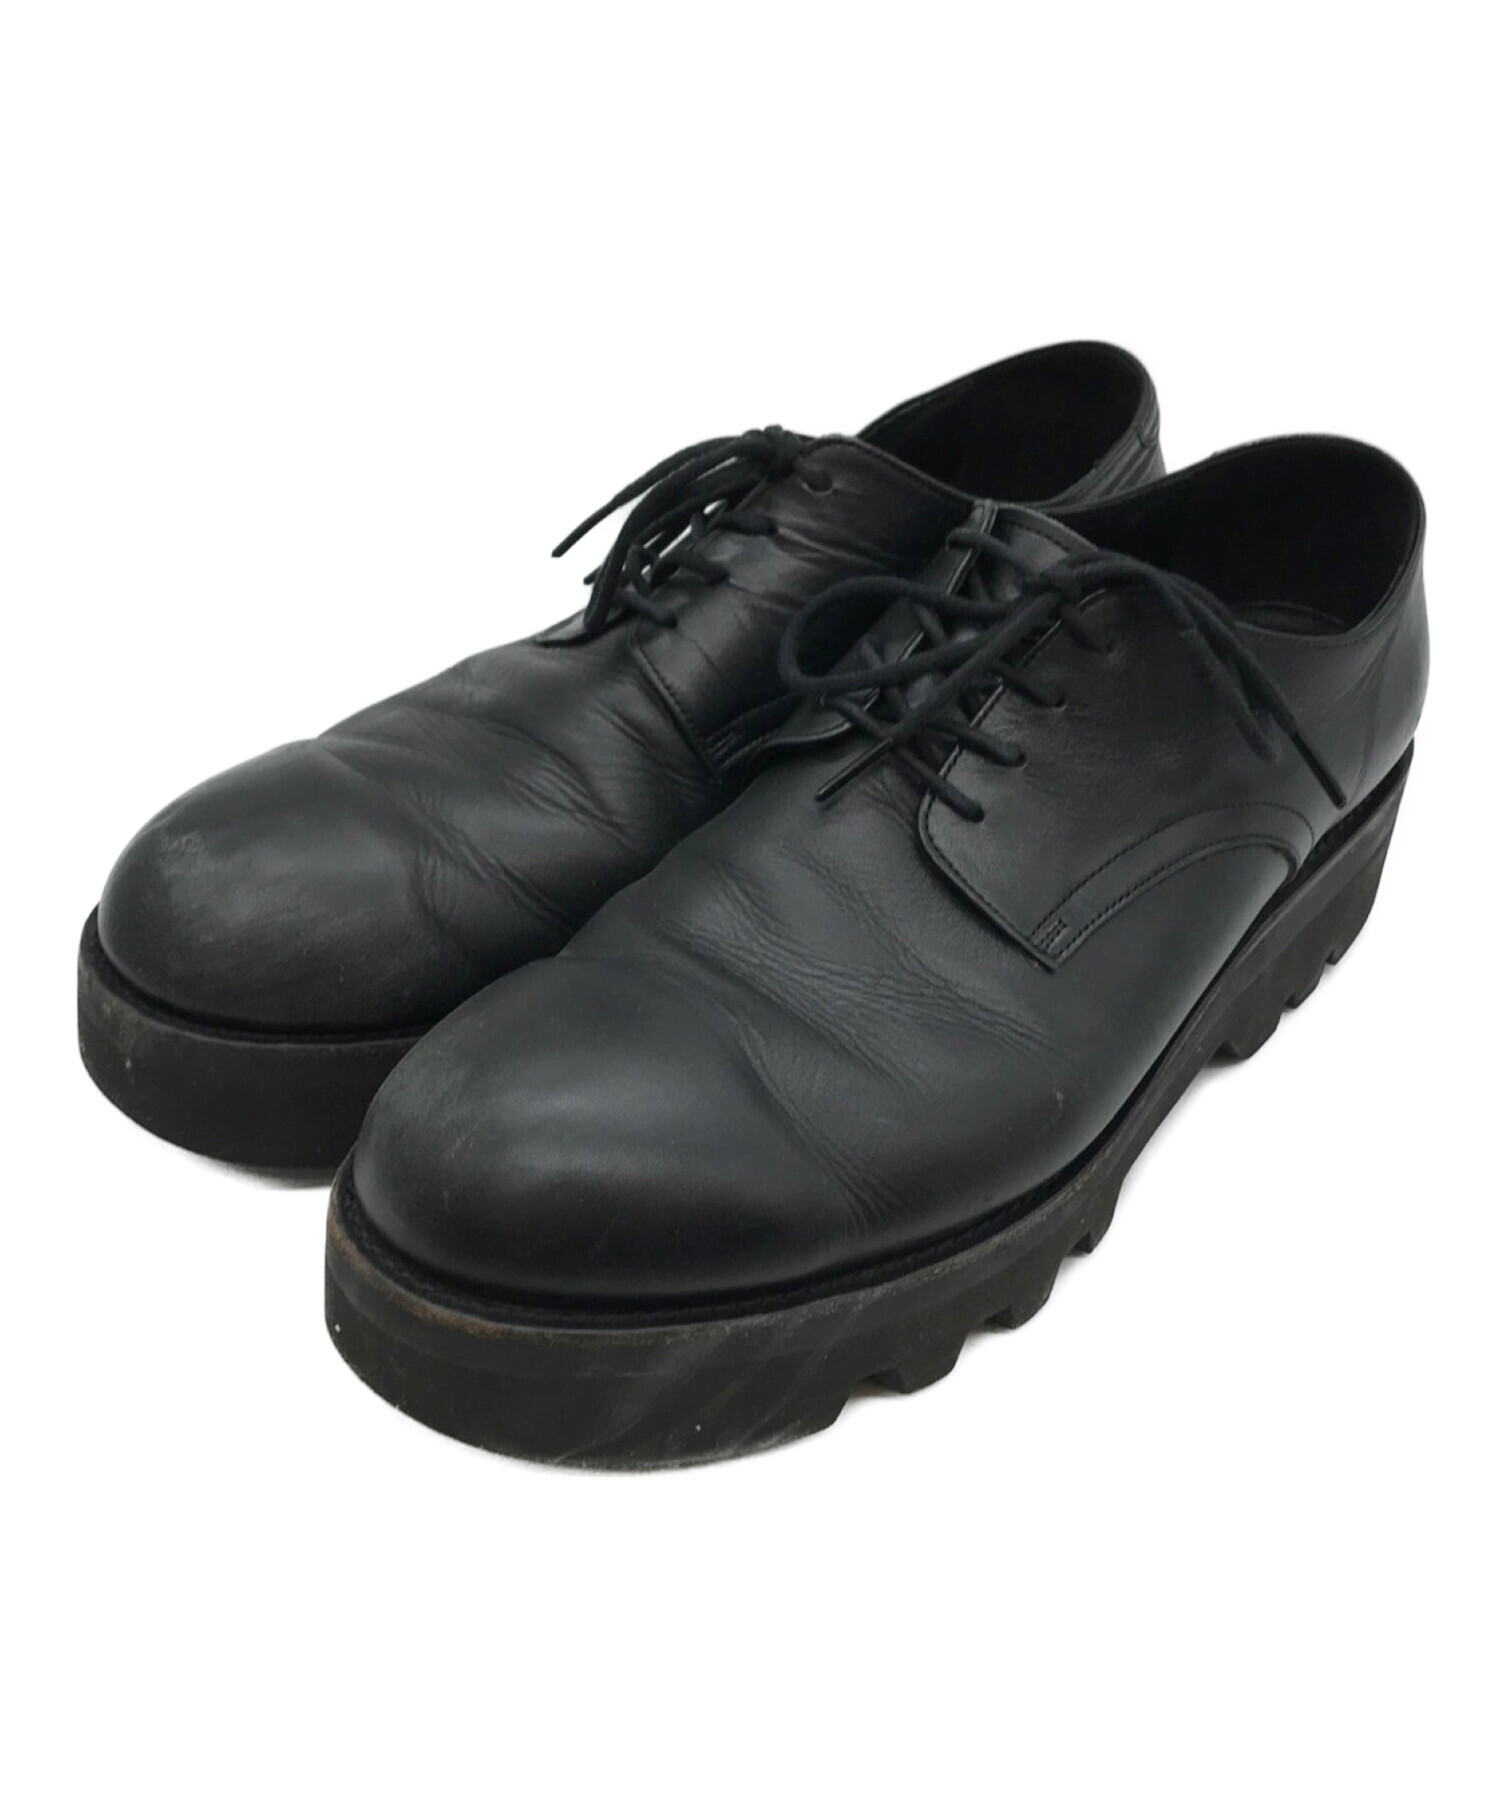 LAD MUSICIAN  ROUND TOE SHOES